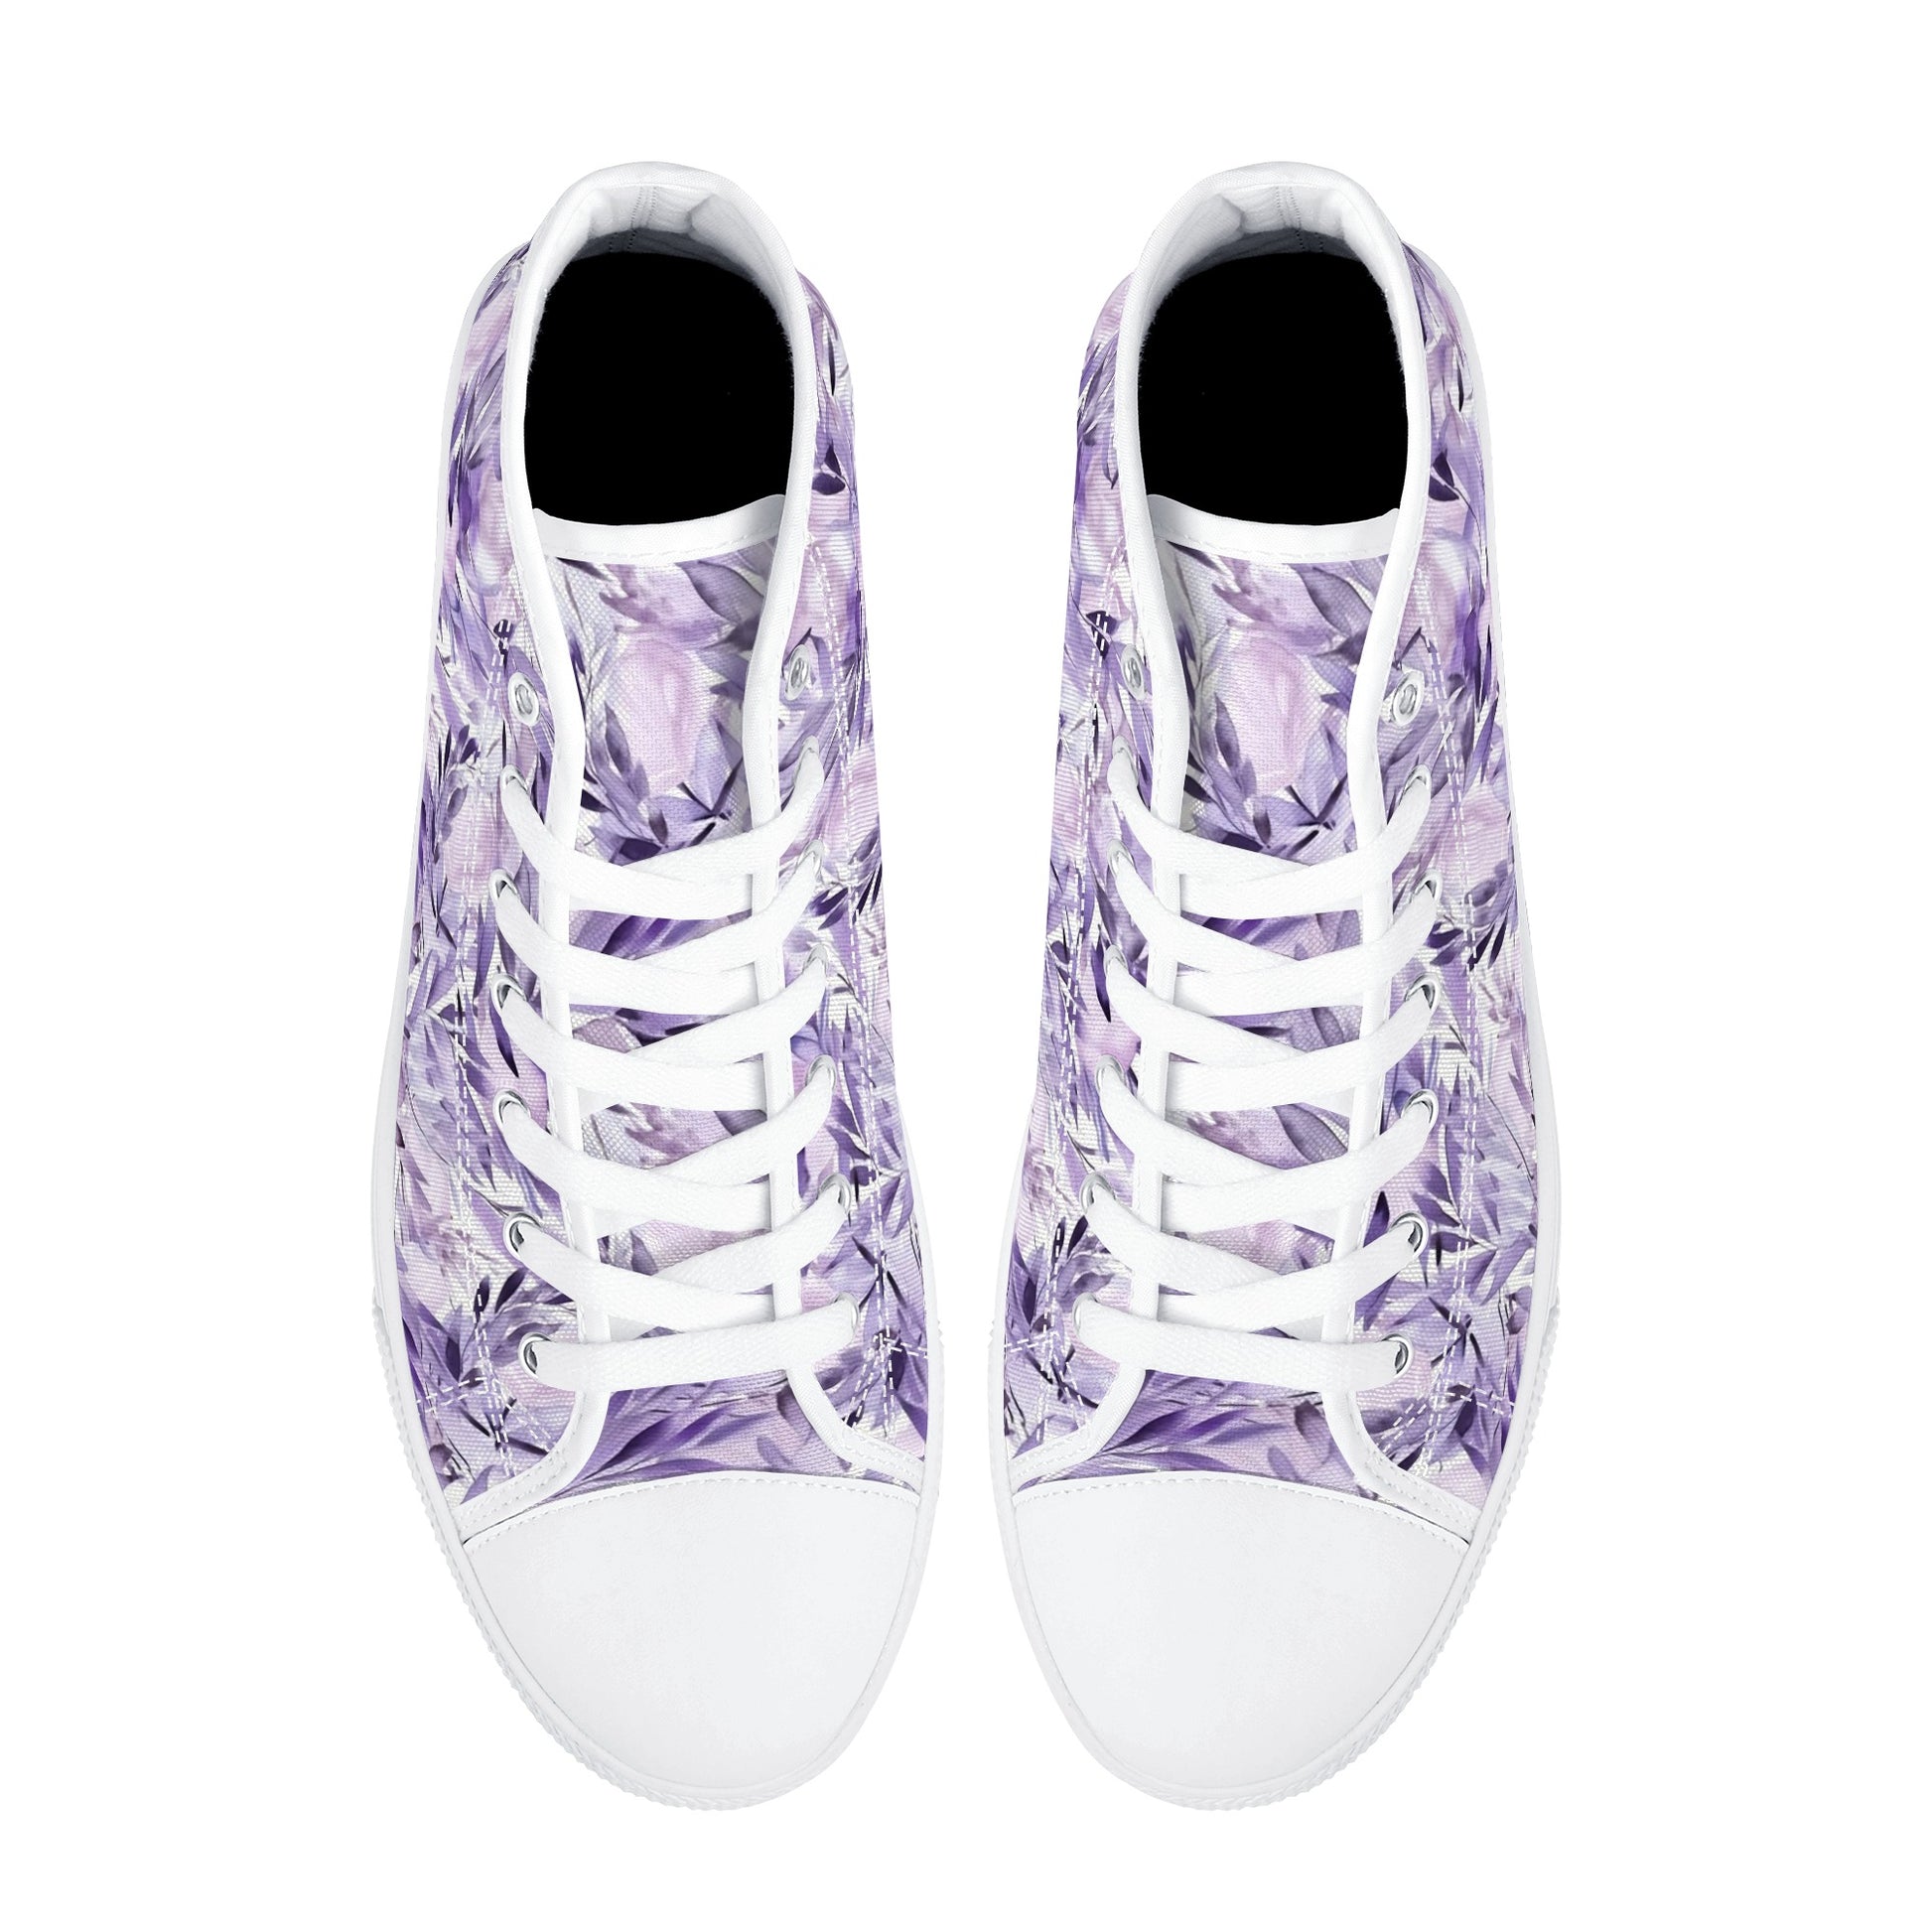 Lavender Women High Top Shoes, Watercolor Floral Flowers Lace Up Sneakers Footwear Canvas Streetwear Girls White Black Designer Starcove Fashion